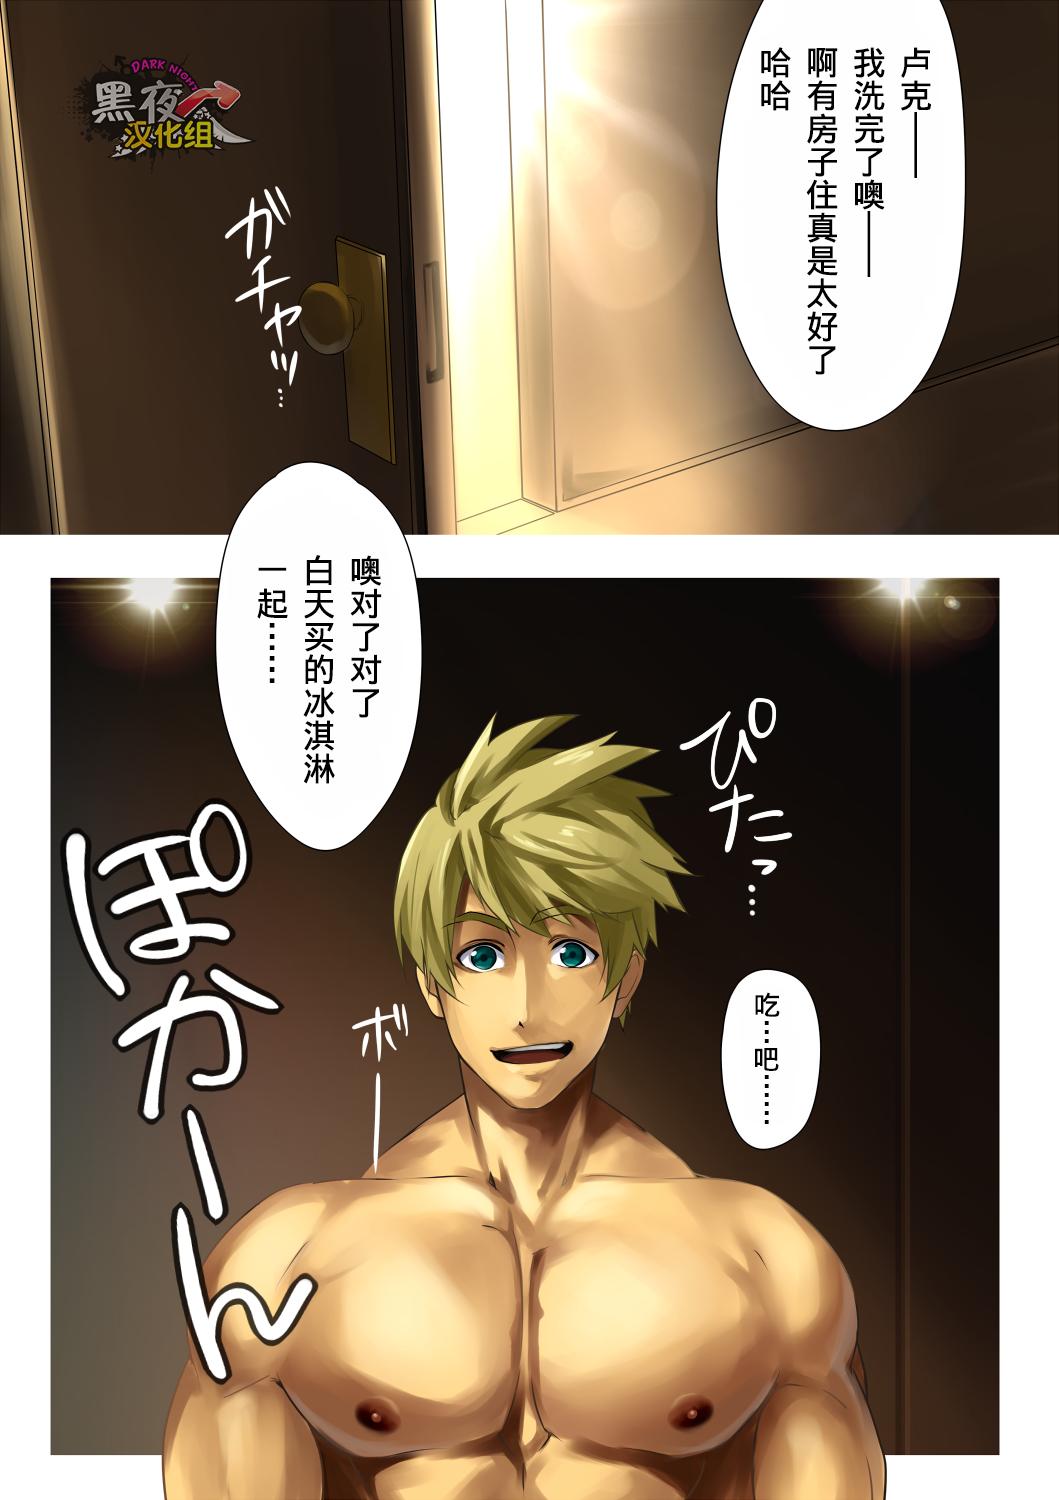 Spandex malemilk - Tales of the abyss Analplay - Page 7